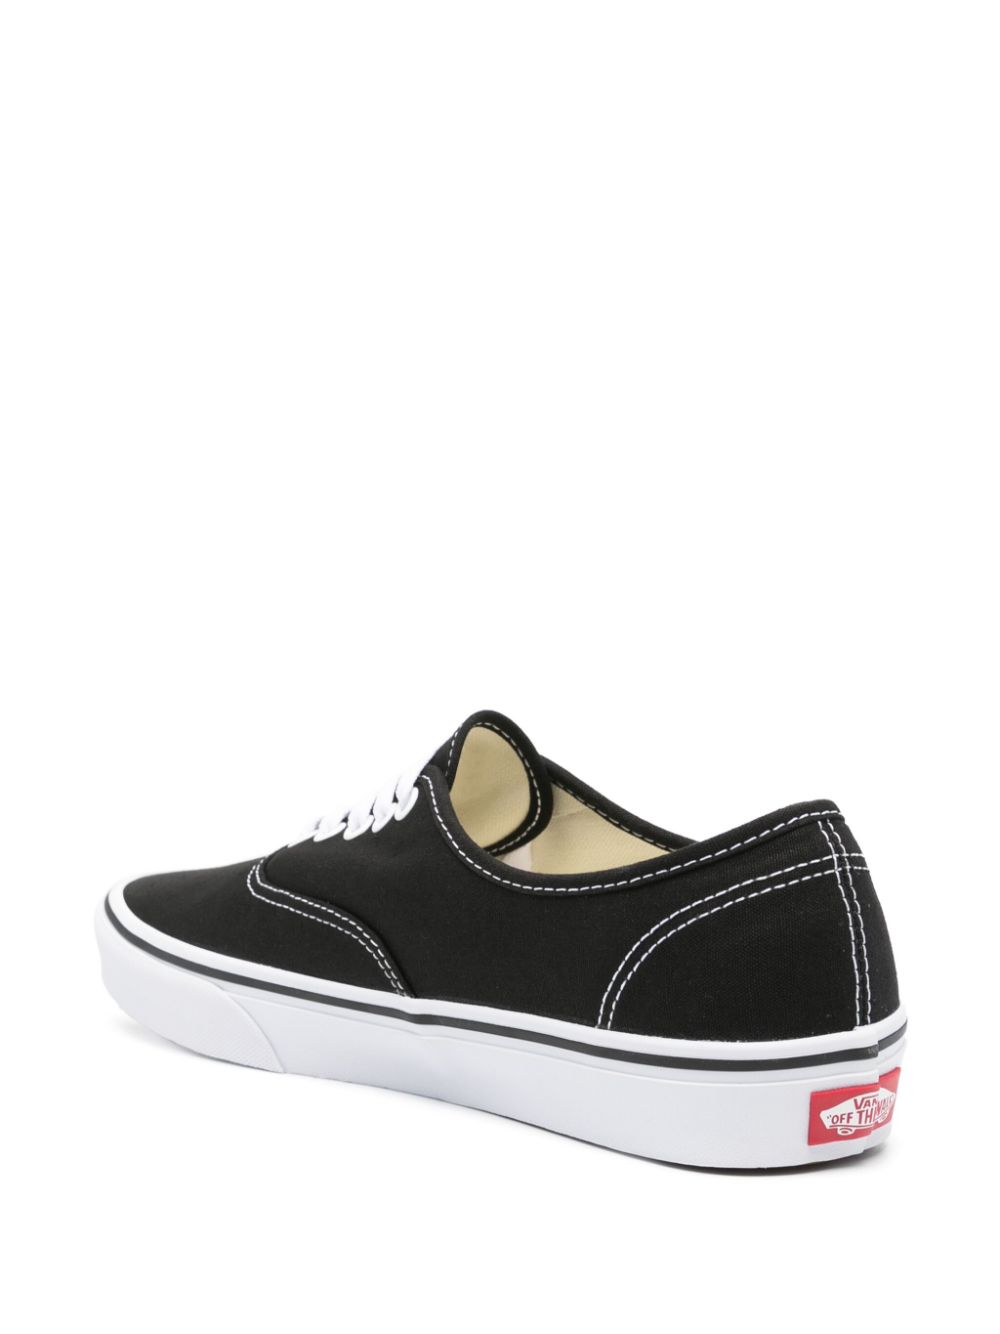 Authentic Canvas sneakers<BR/><BR/><BR/>